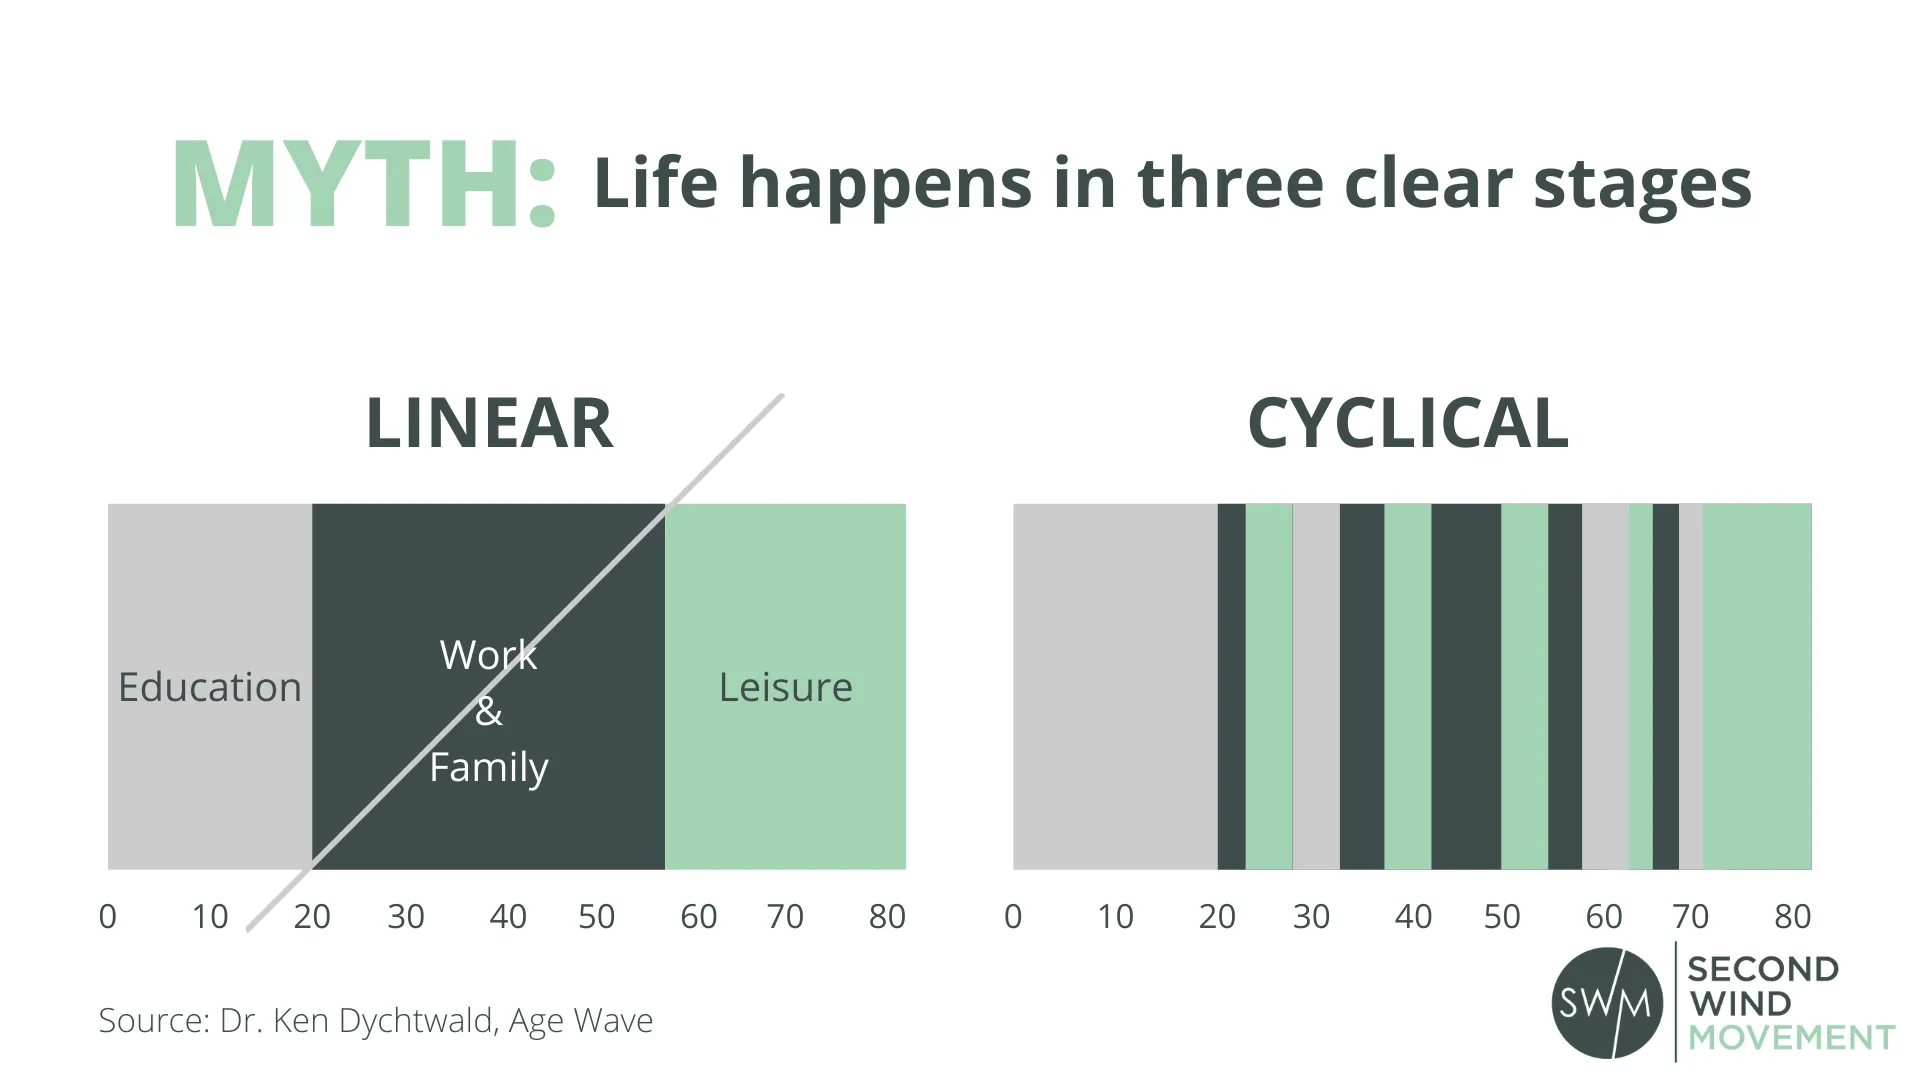 it's a myth that life happens in three clear linear stages, it happens in cyclical stages